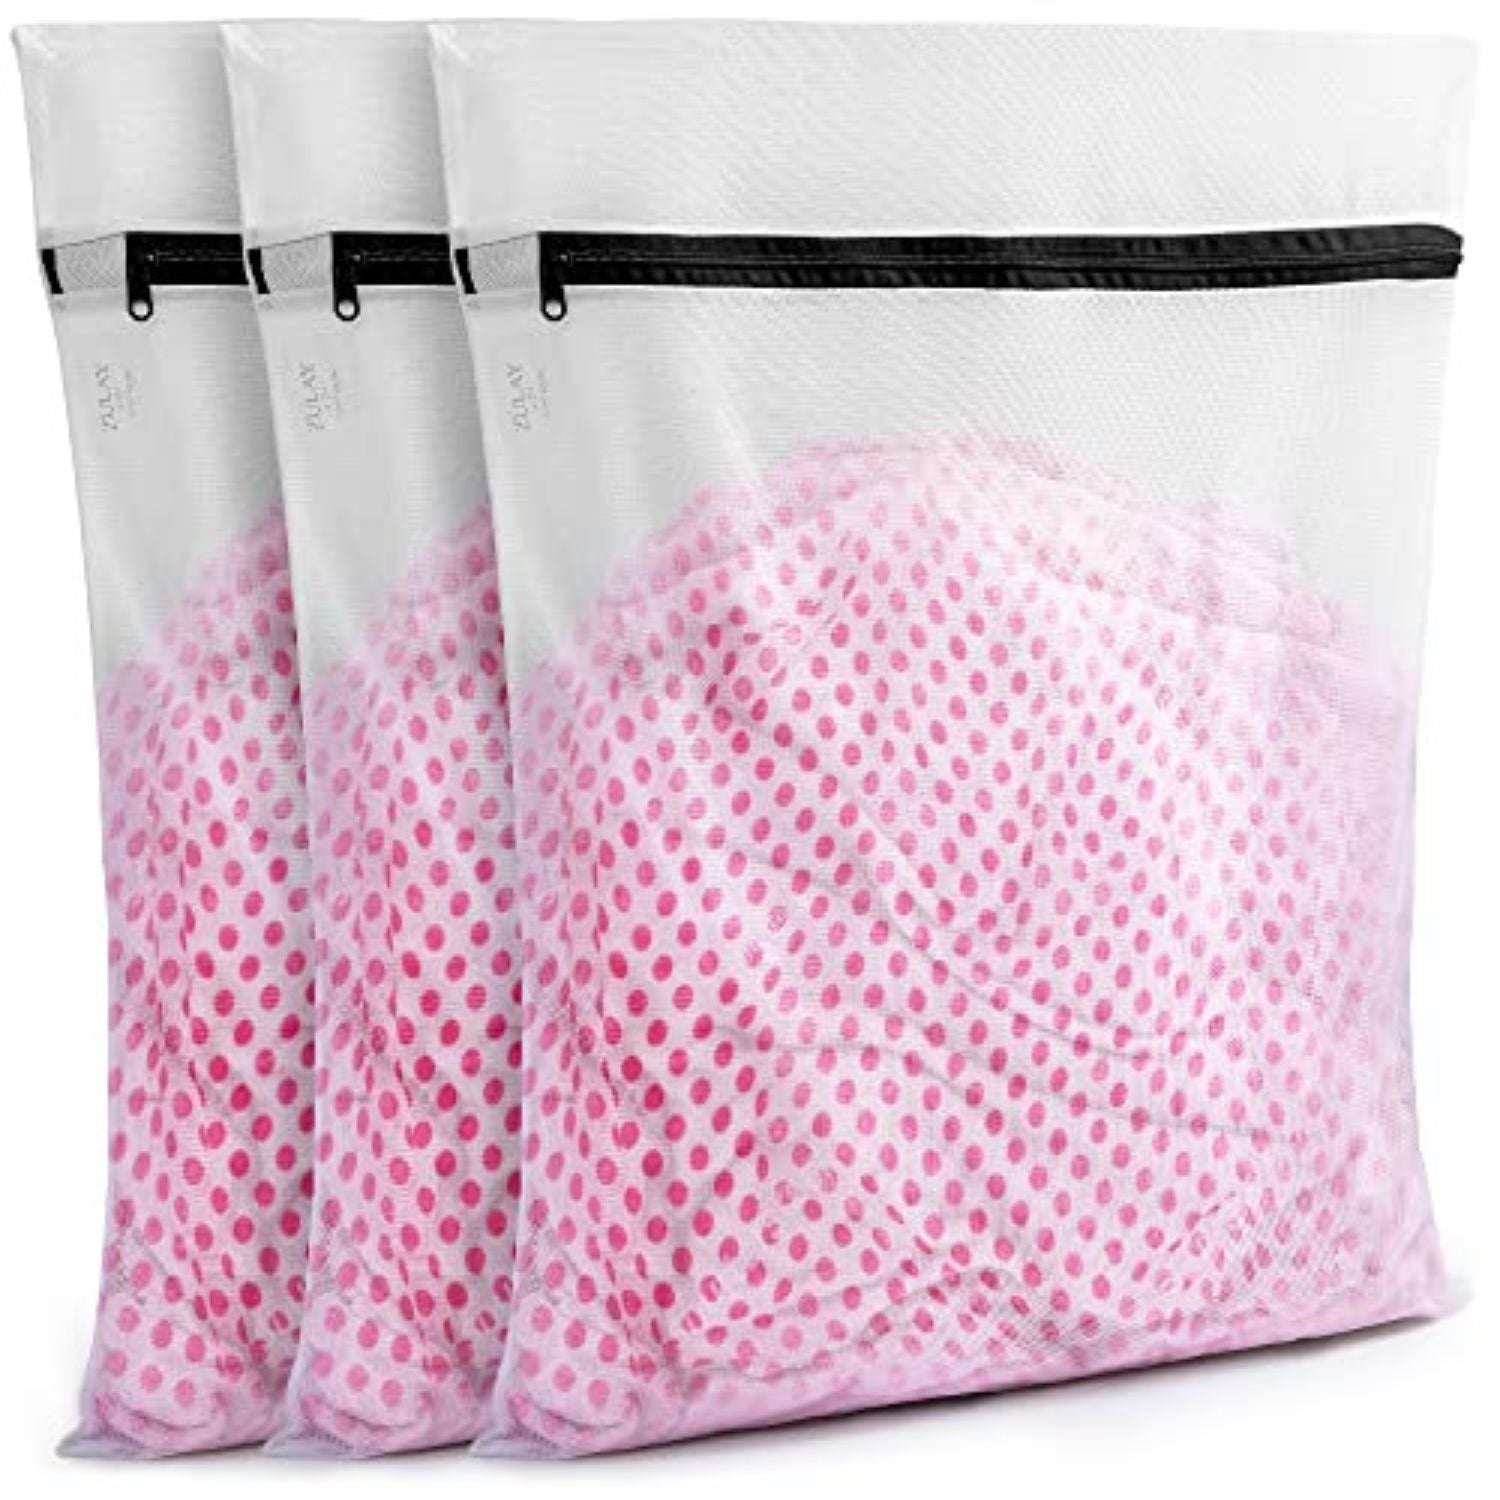 Zulay Home Mesh Laundry Bags